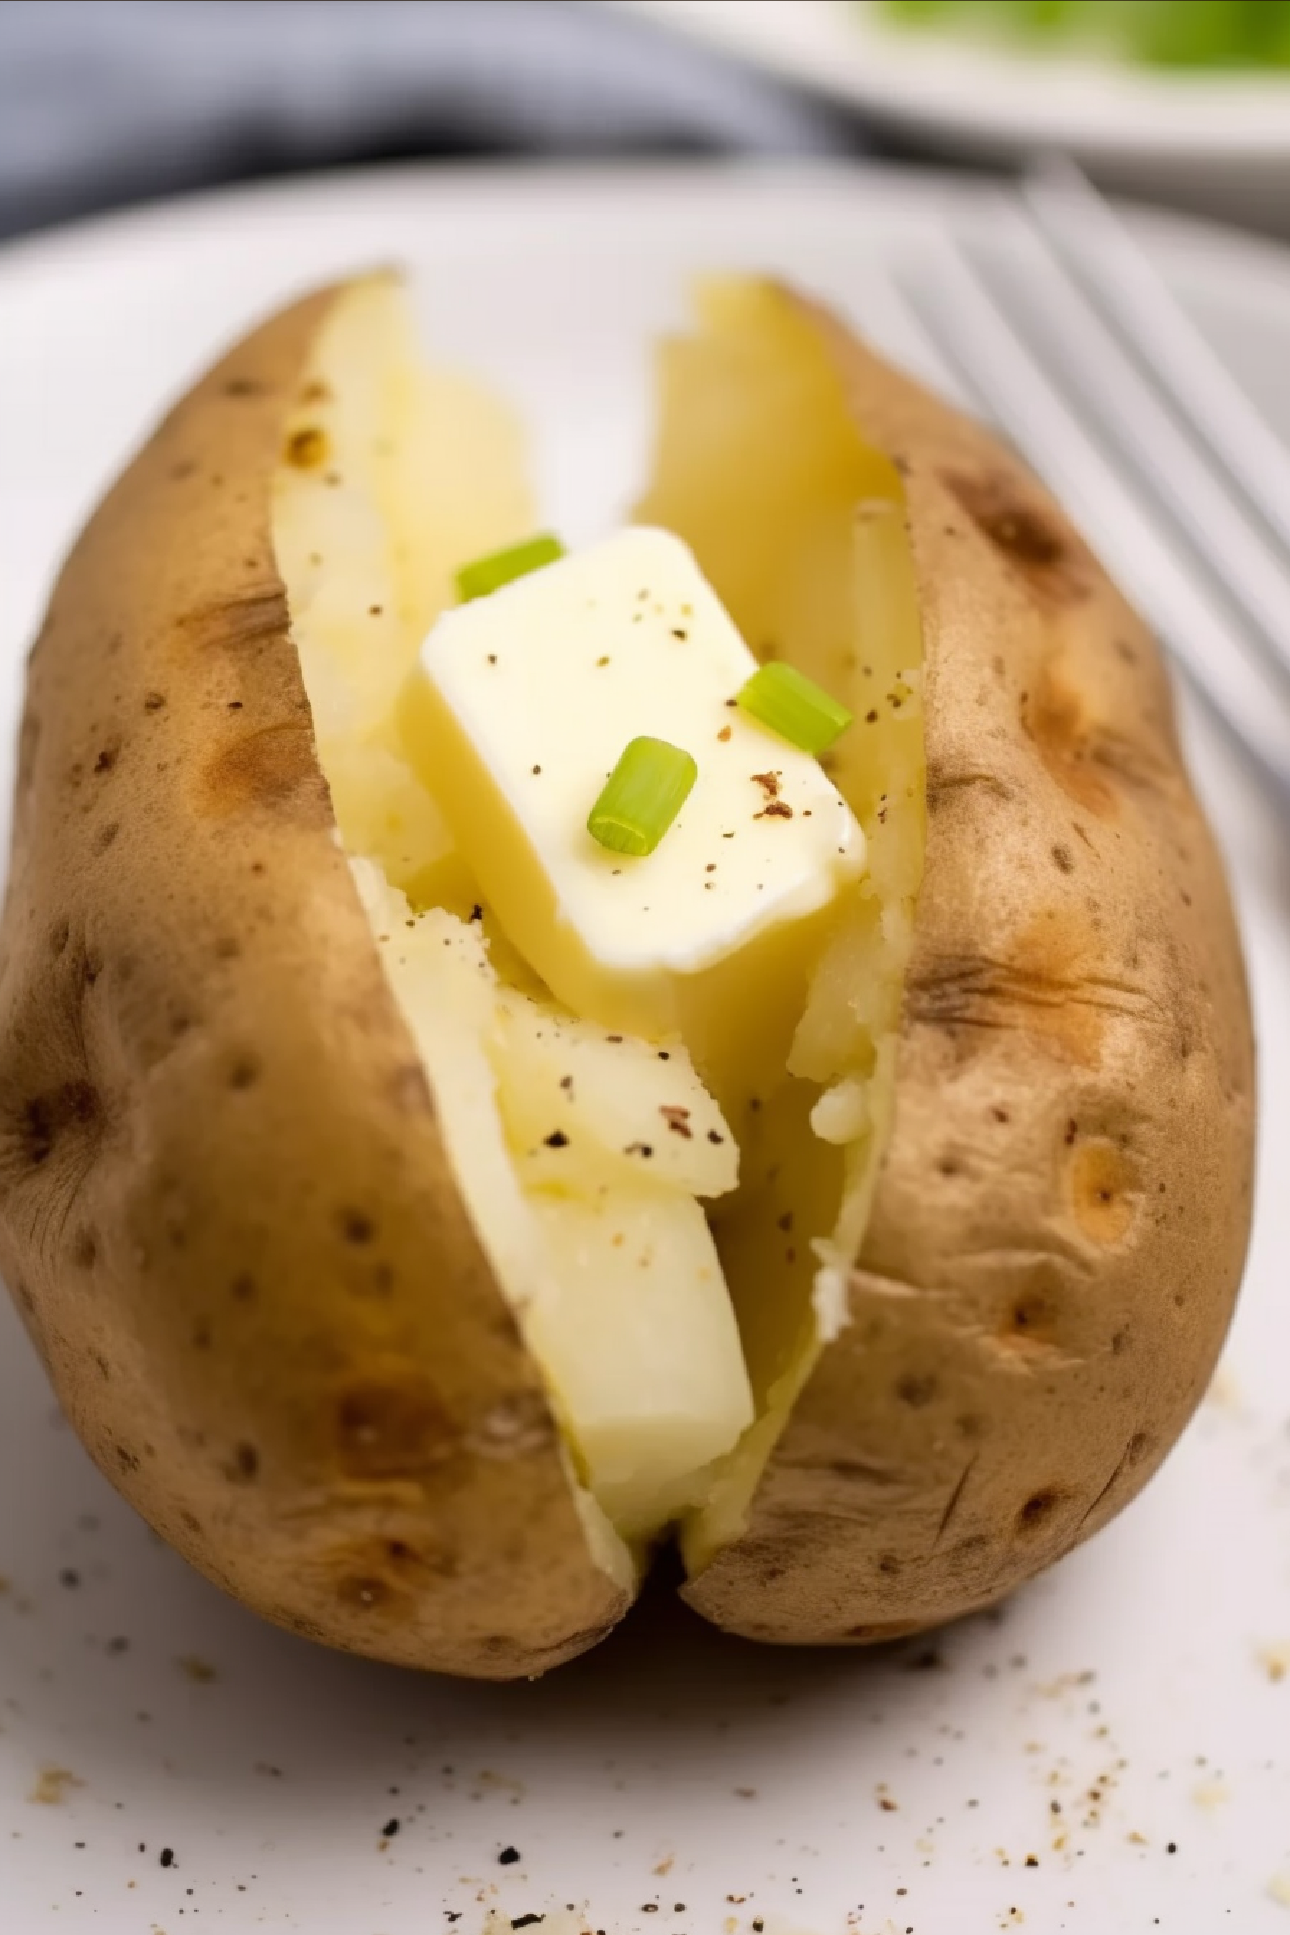 No time to cook? No problem! This microwave potato recipe is a lifesaver for quick, satisfying meals. Delicious results in minutes. Make sure to pin this recipe!